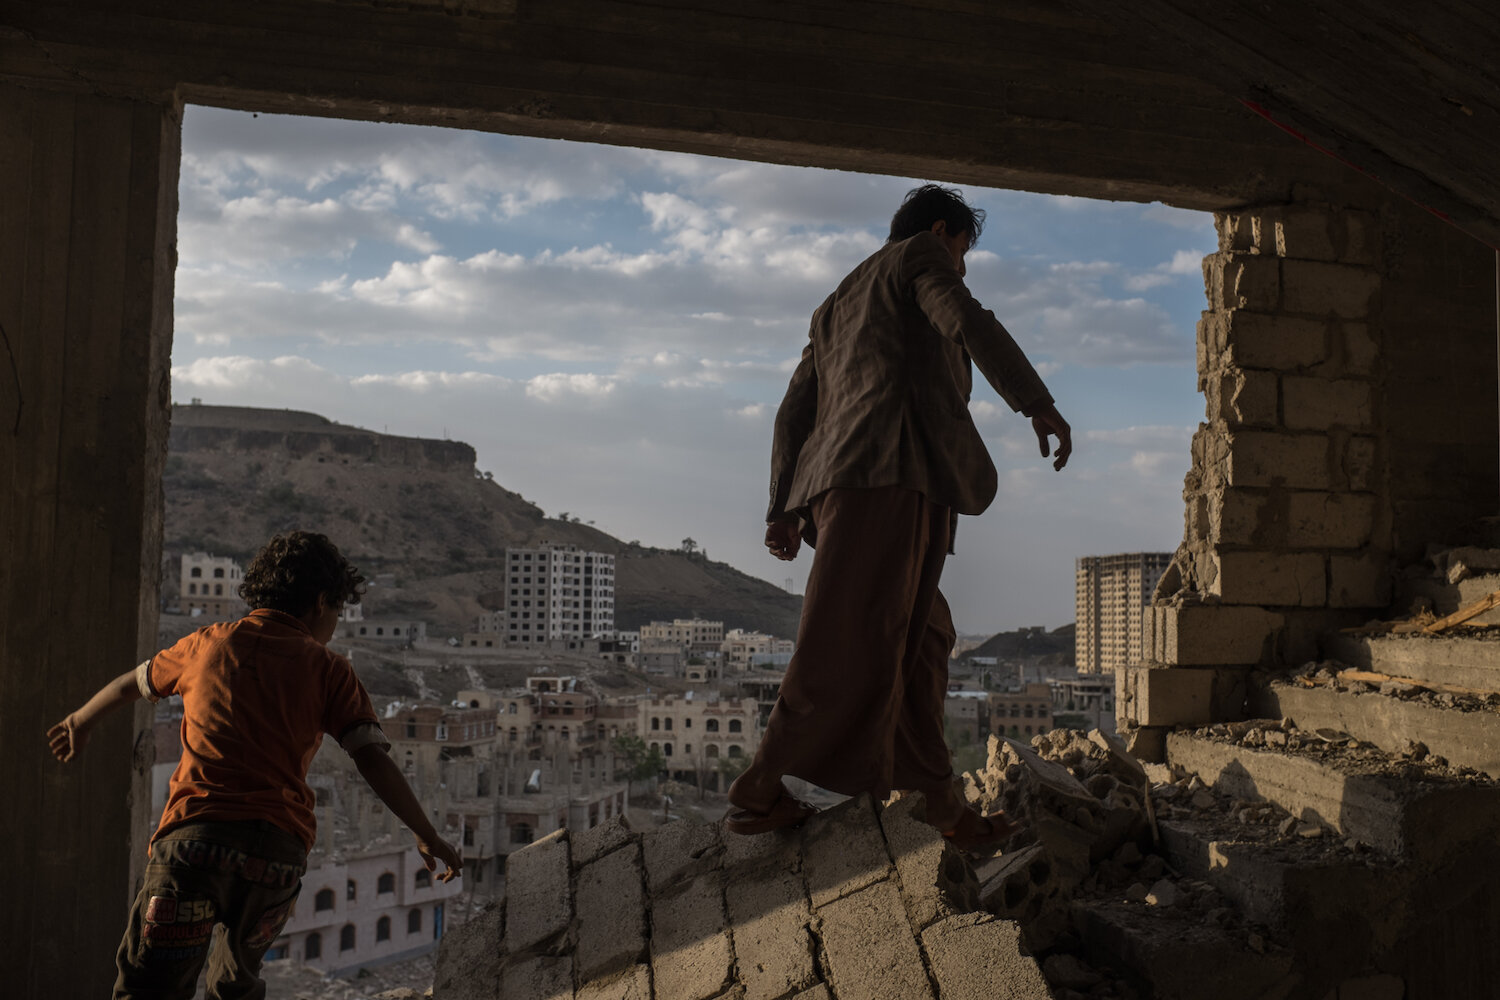  Yemeni brothers climb the broken stairs of an apartment building damaged by airstrikes in the Faj Attan district of Sana'a, Yemen on August 17, 2015. Faj Attan mountain may have a large weapons cache inside, which, if hit by an airstrike, some assum